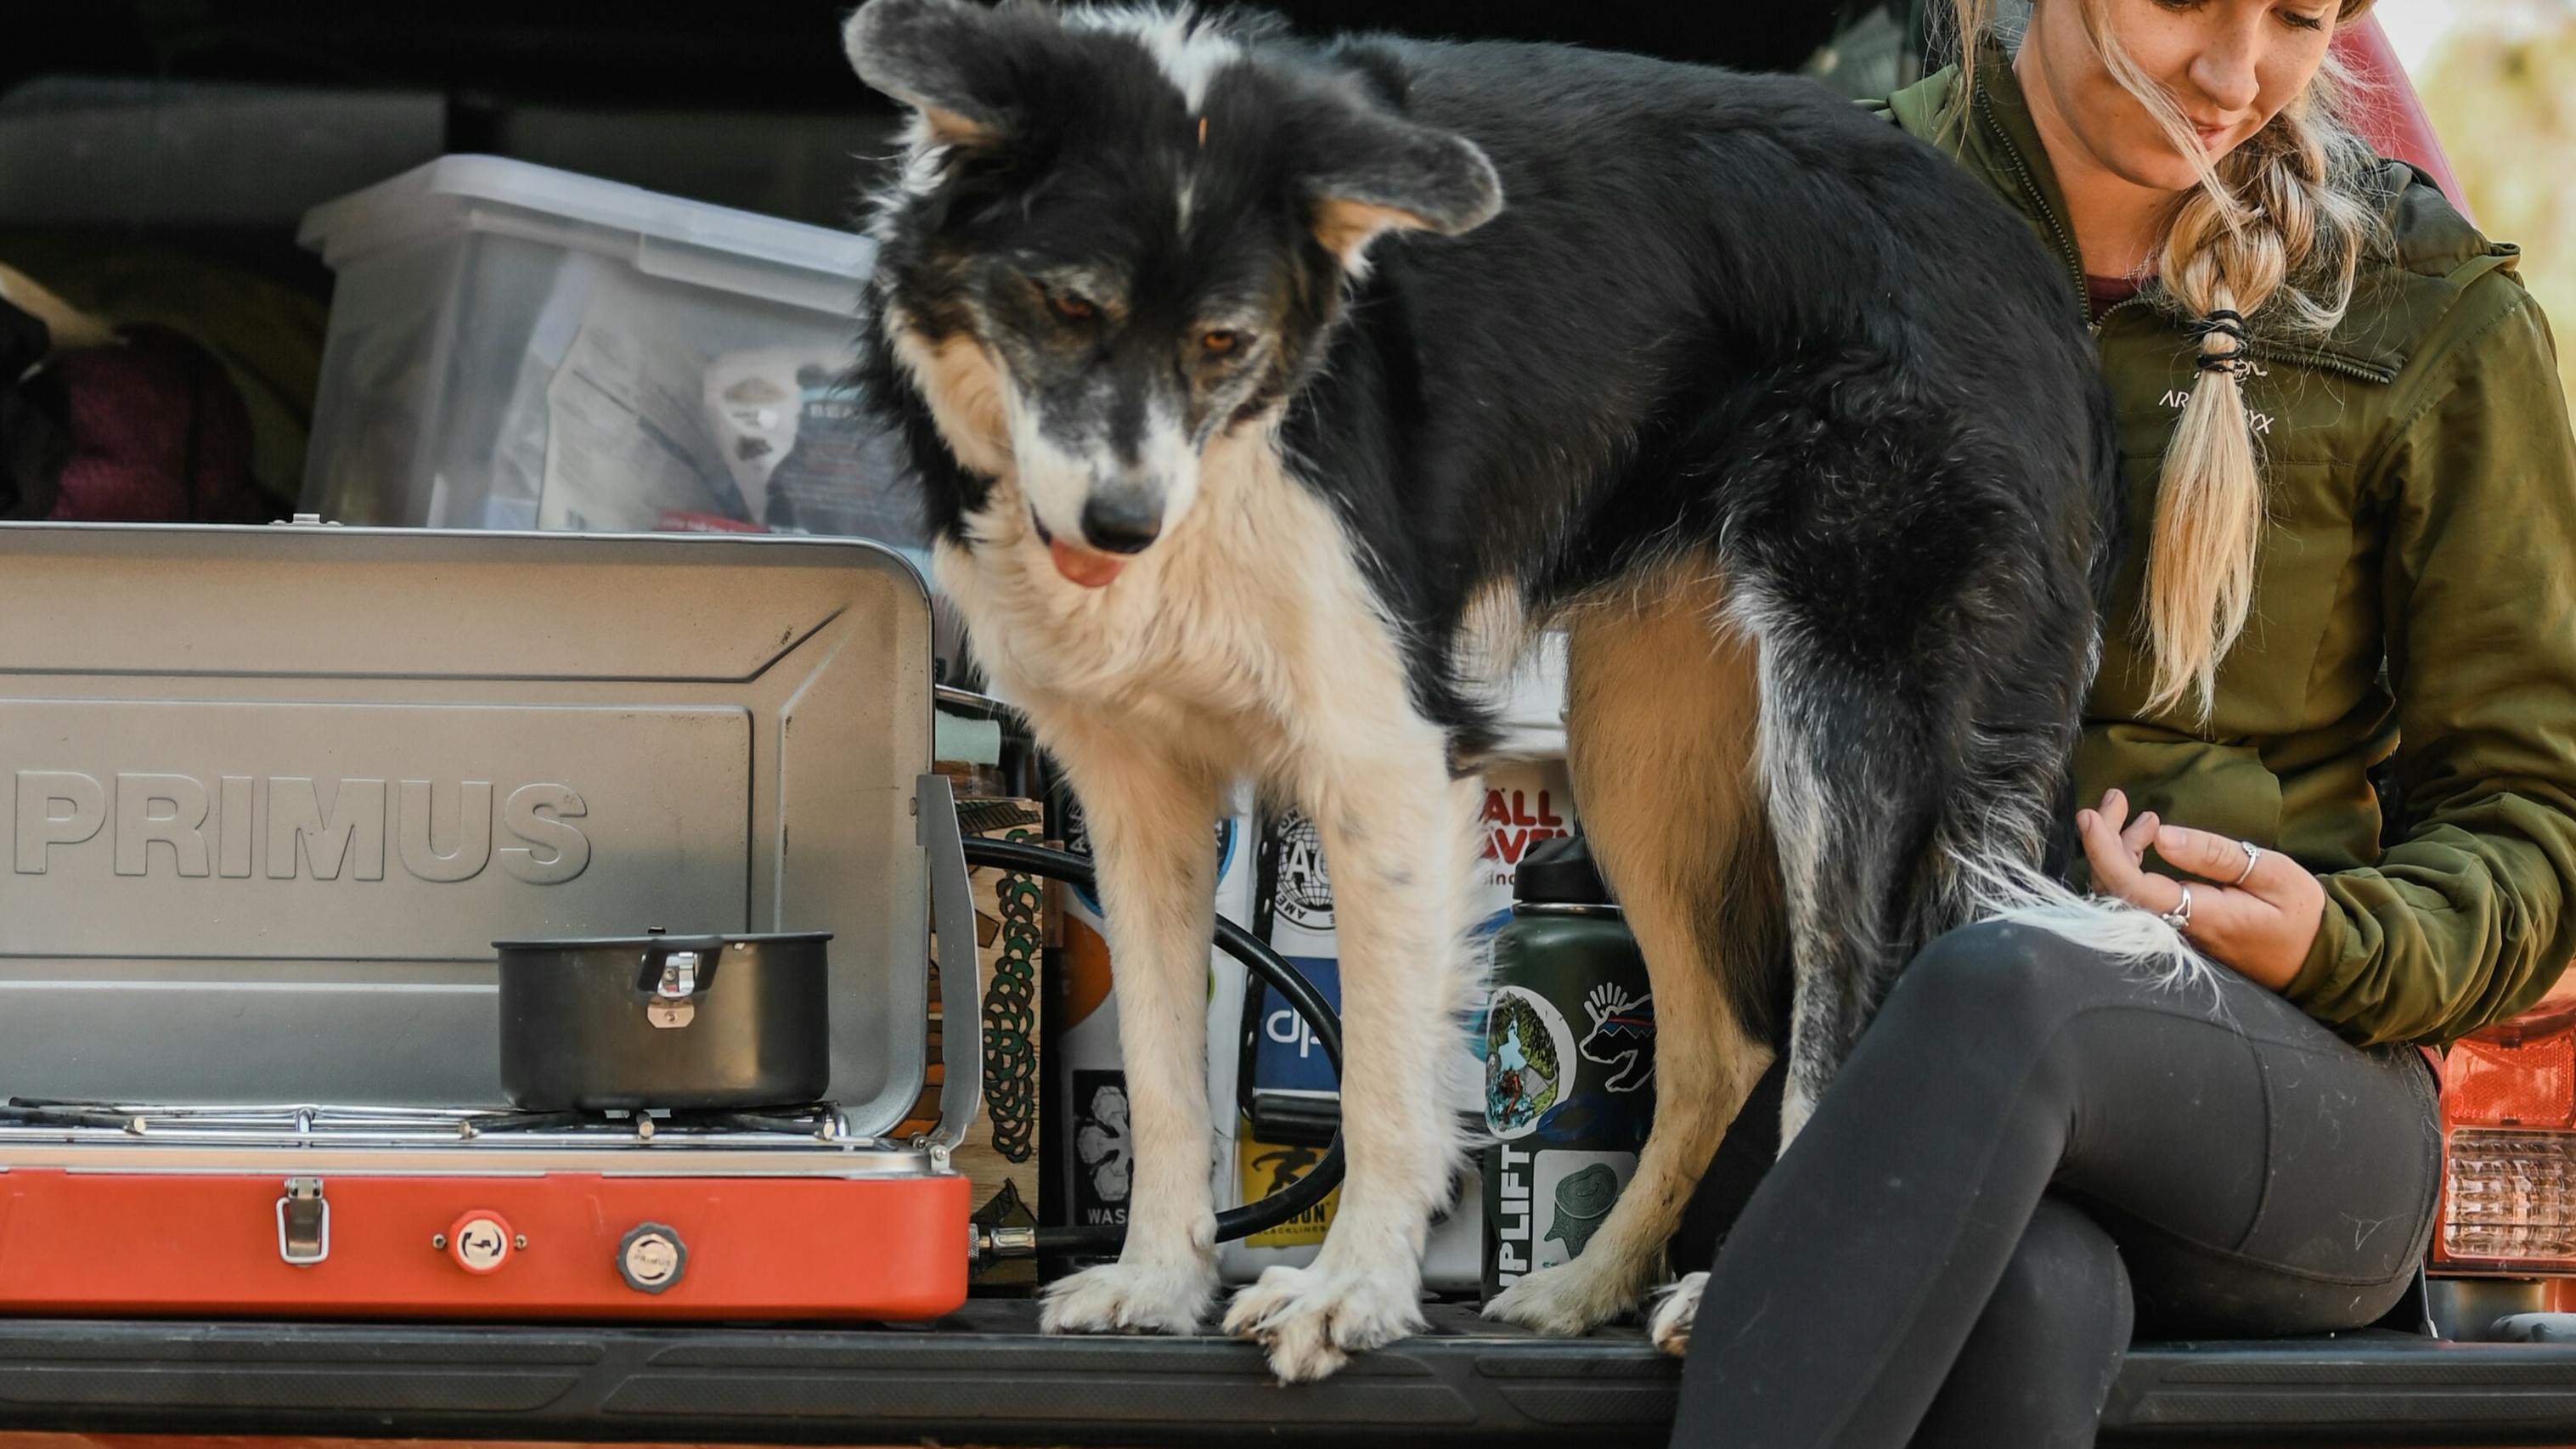 A woman and a dog sitting on the tailgate of a car. There is camping gear visible in the car and a camping stove on the tailgate. 